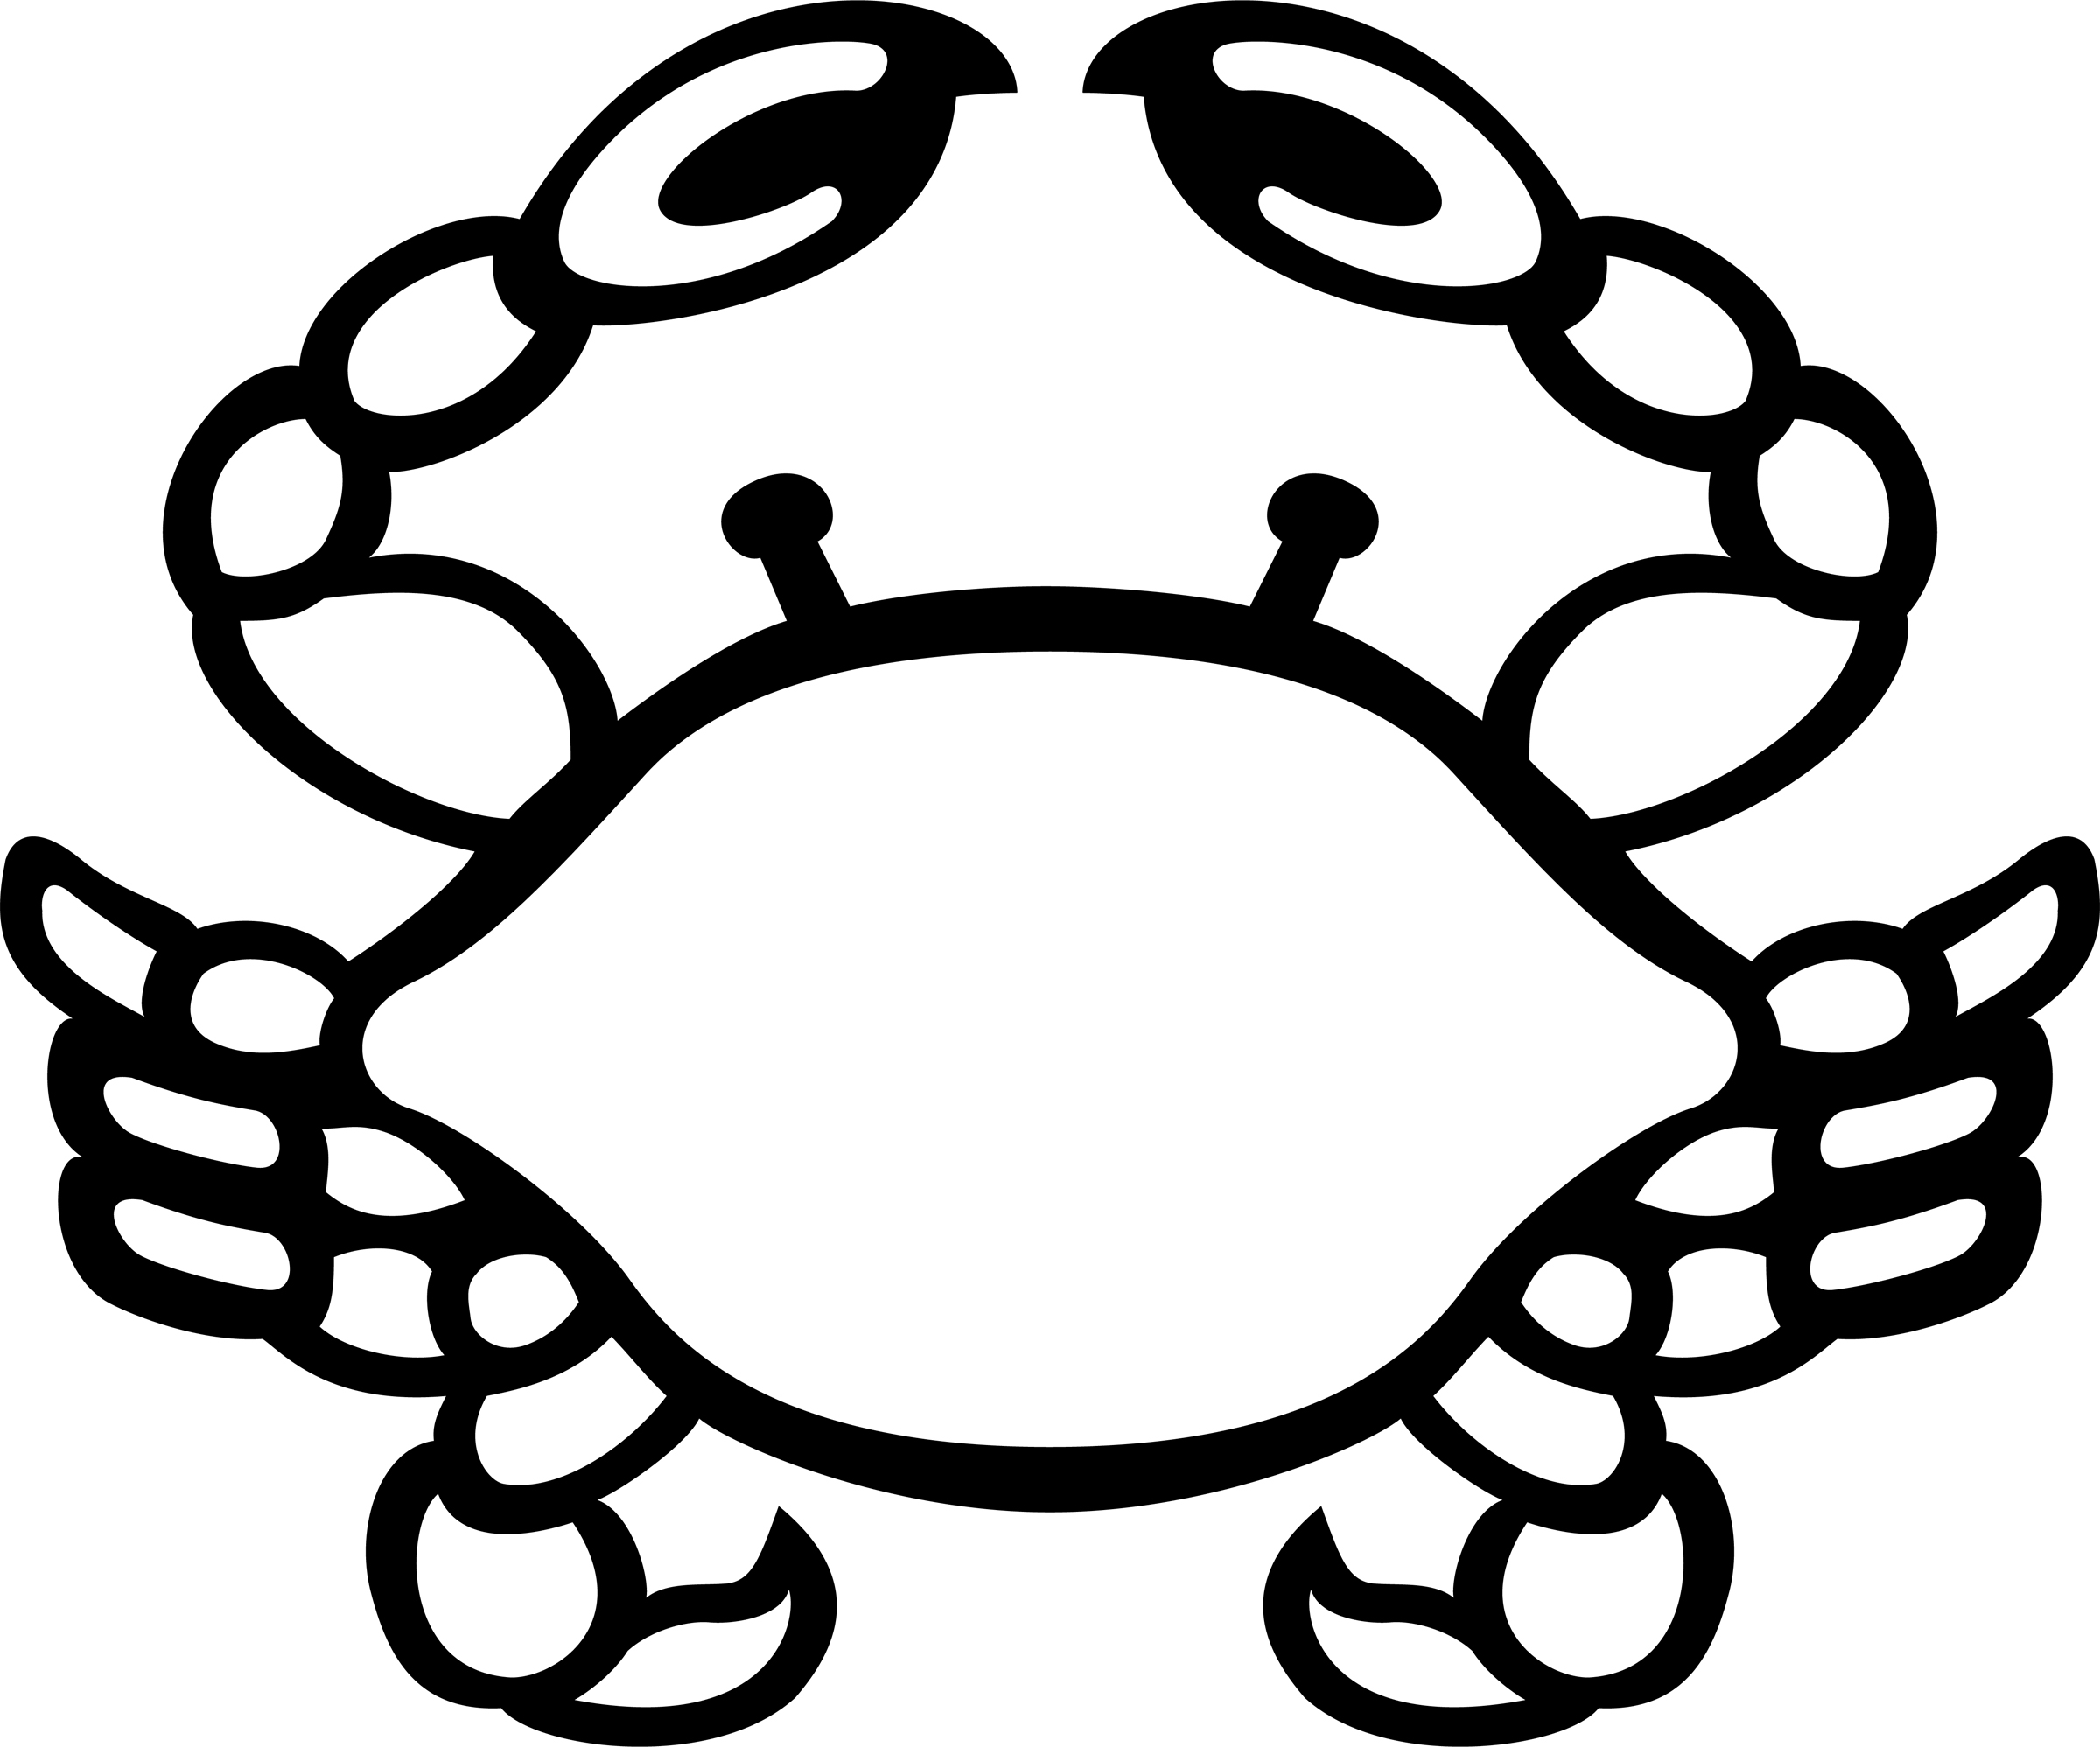 Clam Clipart Black And White | Clipart Panda - Free Clipart Images